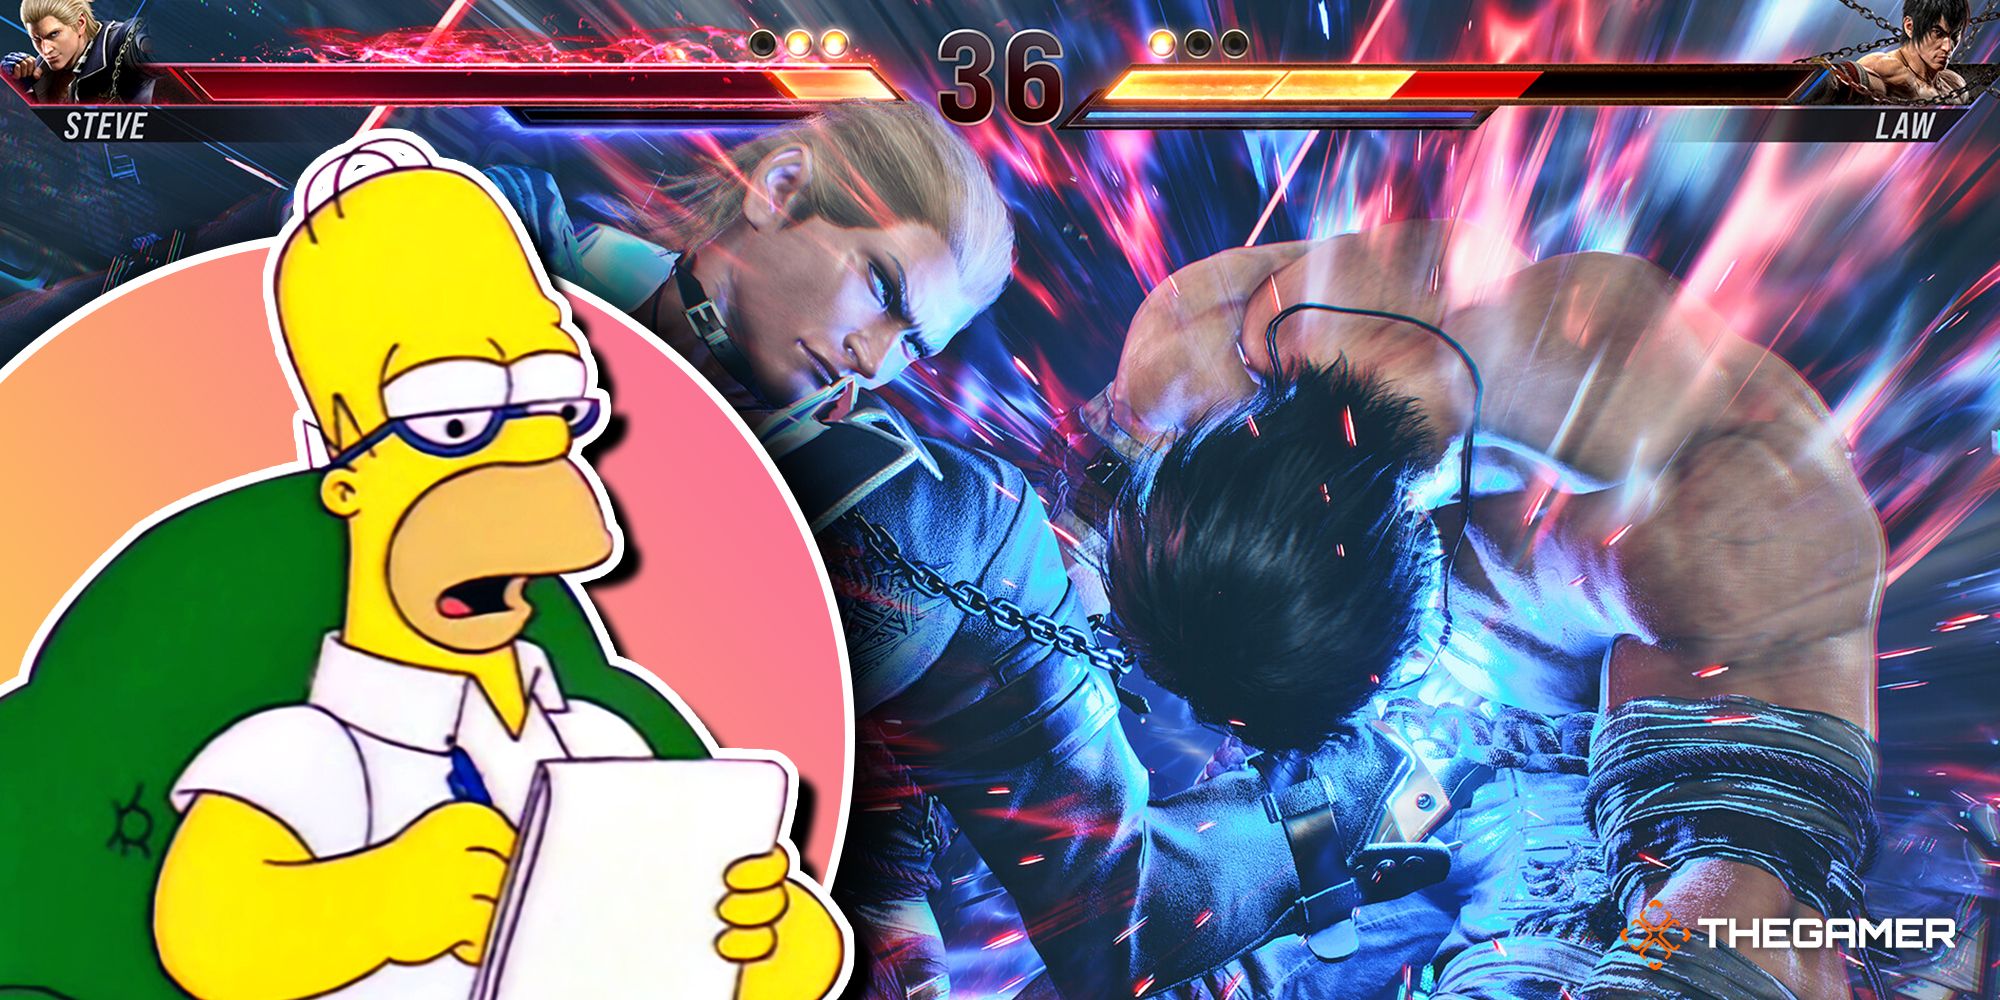 Homer from the Simpsons taking notes while Steve punches Law in Tekken 8.